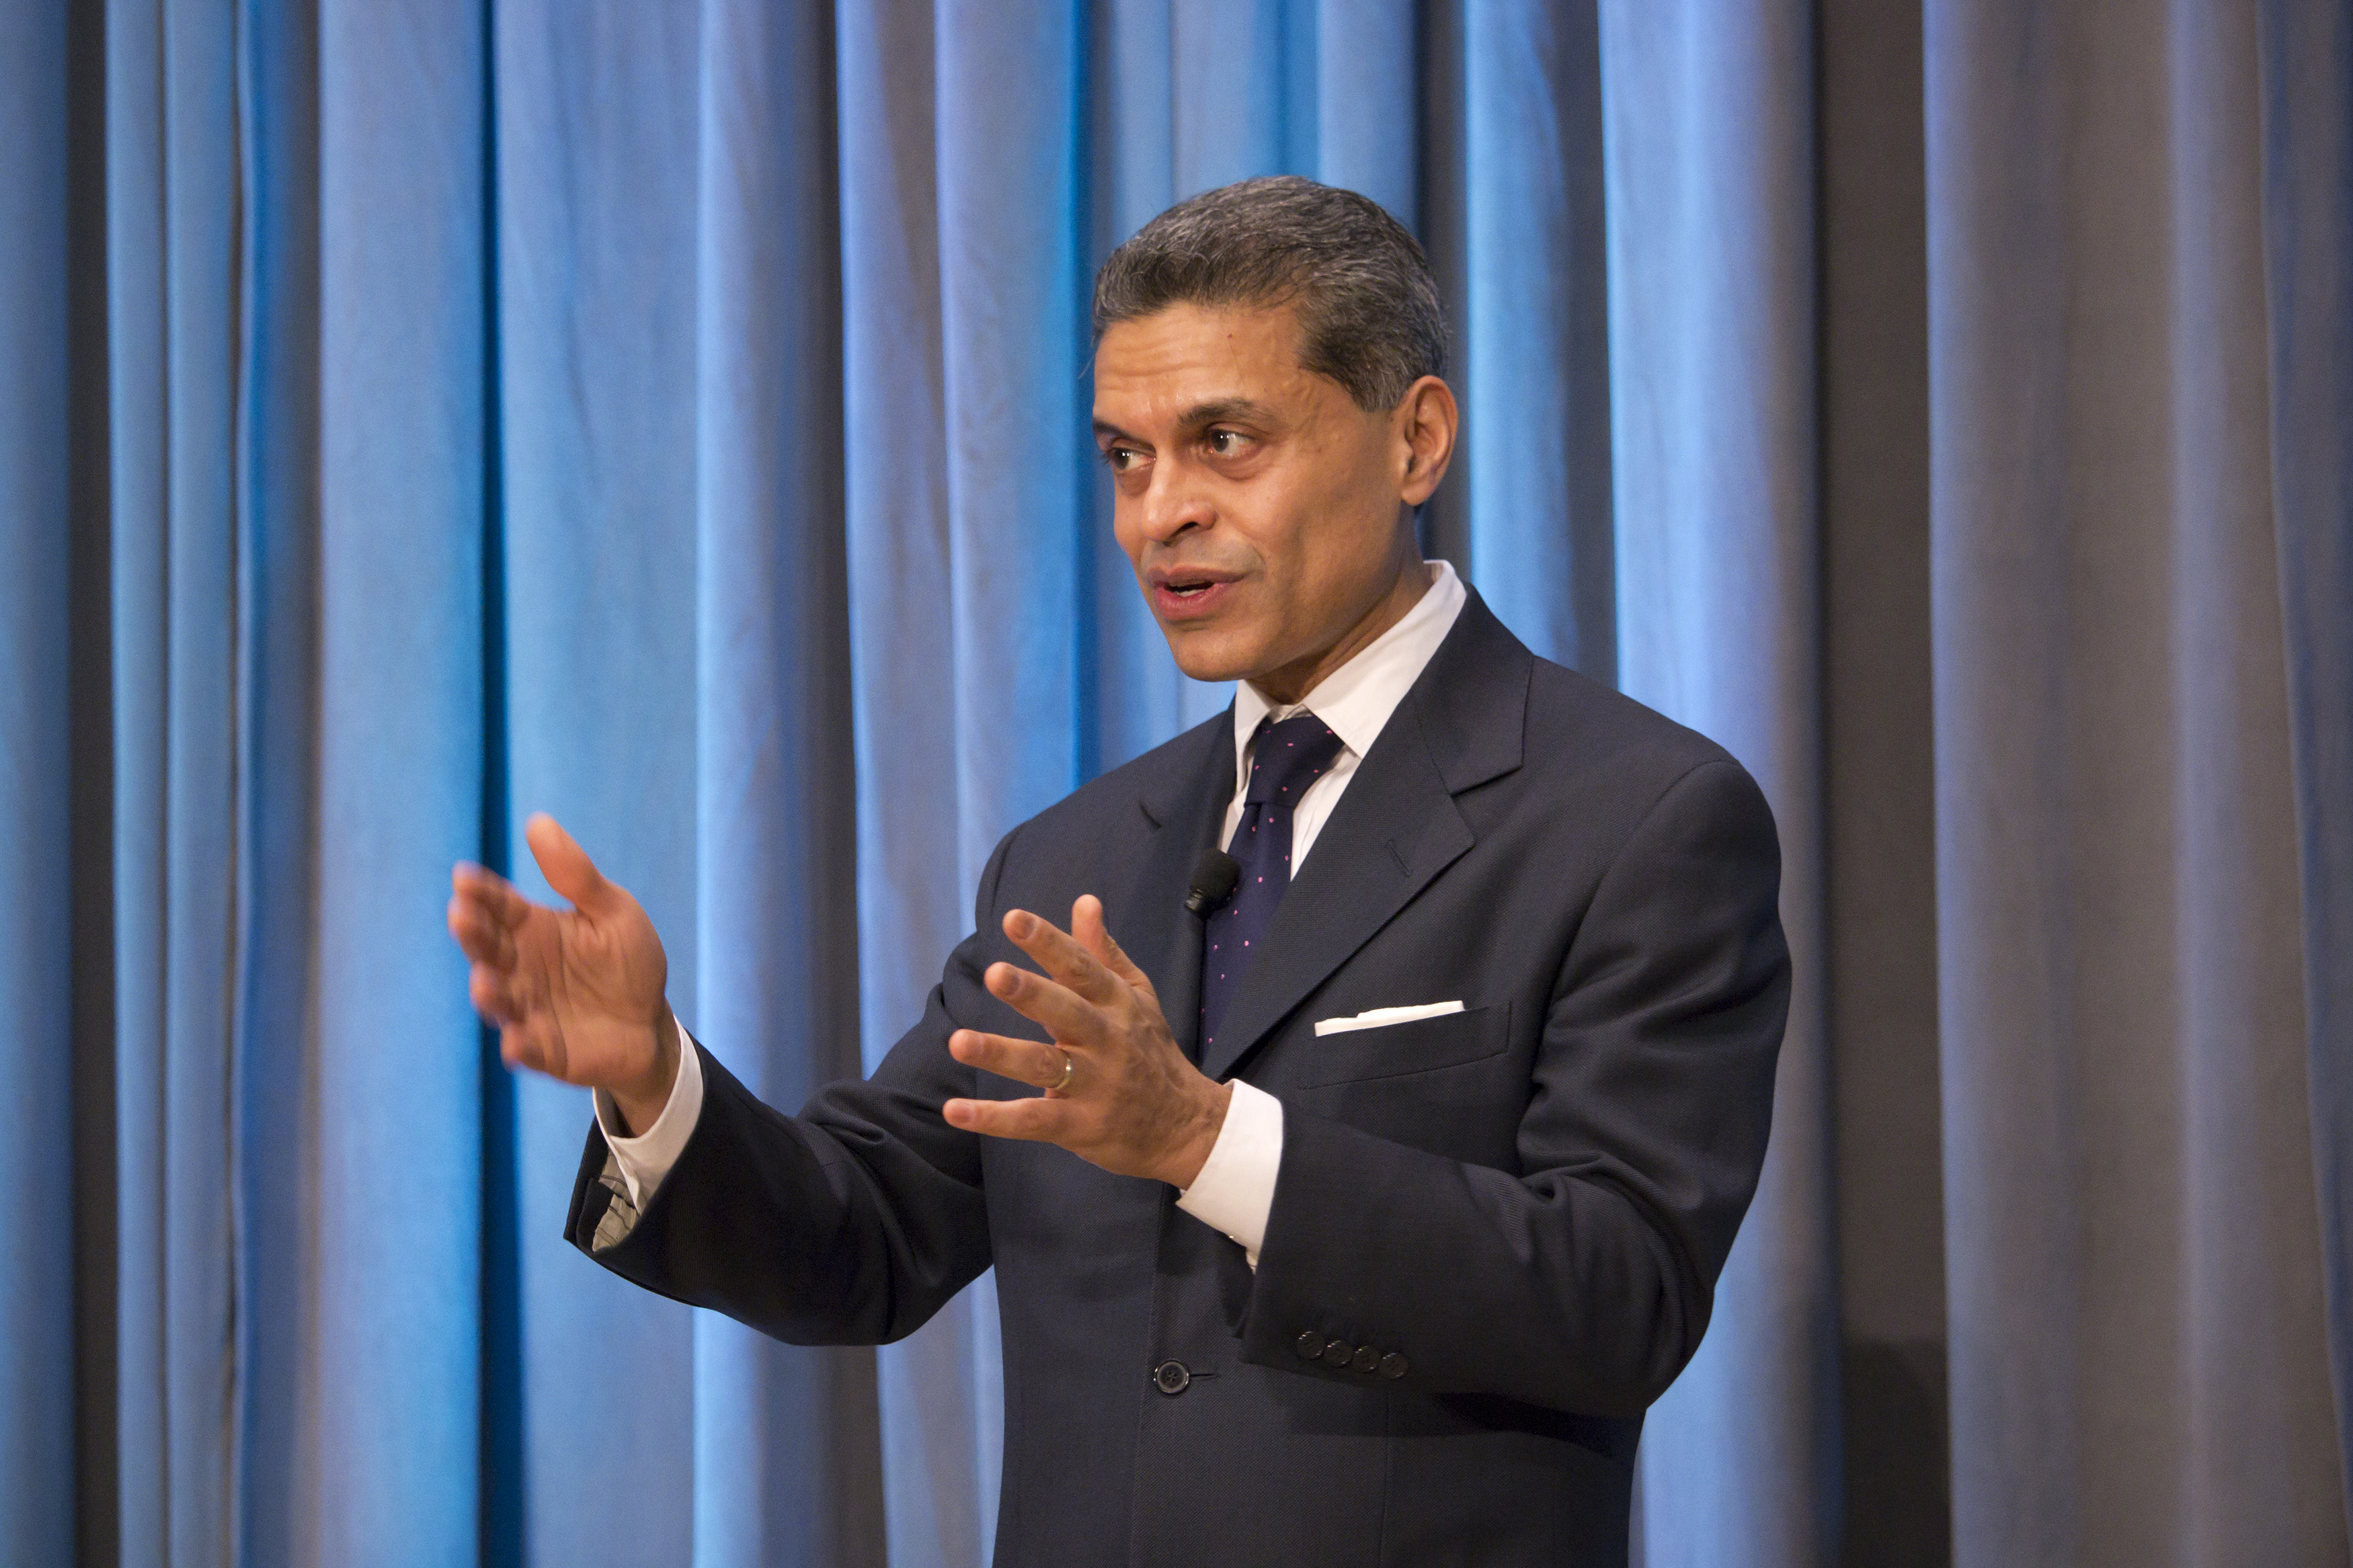 Fareed Zakaria told a packed auditorium at the College's Frey lecture that the United States leads the world in higher education. (photo by Kristen Chavez)